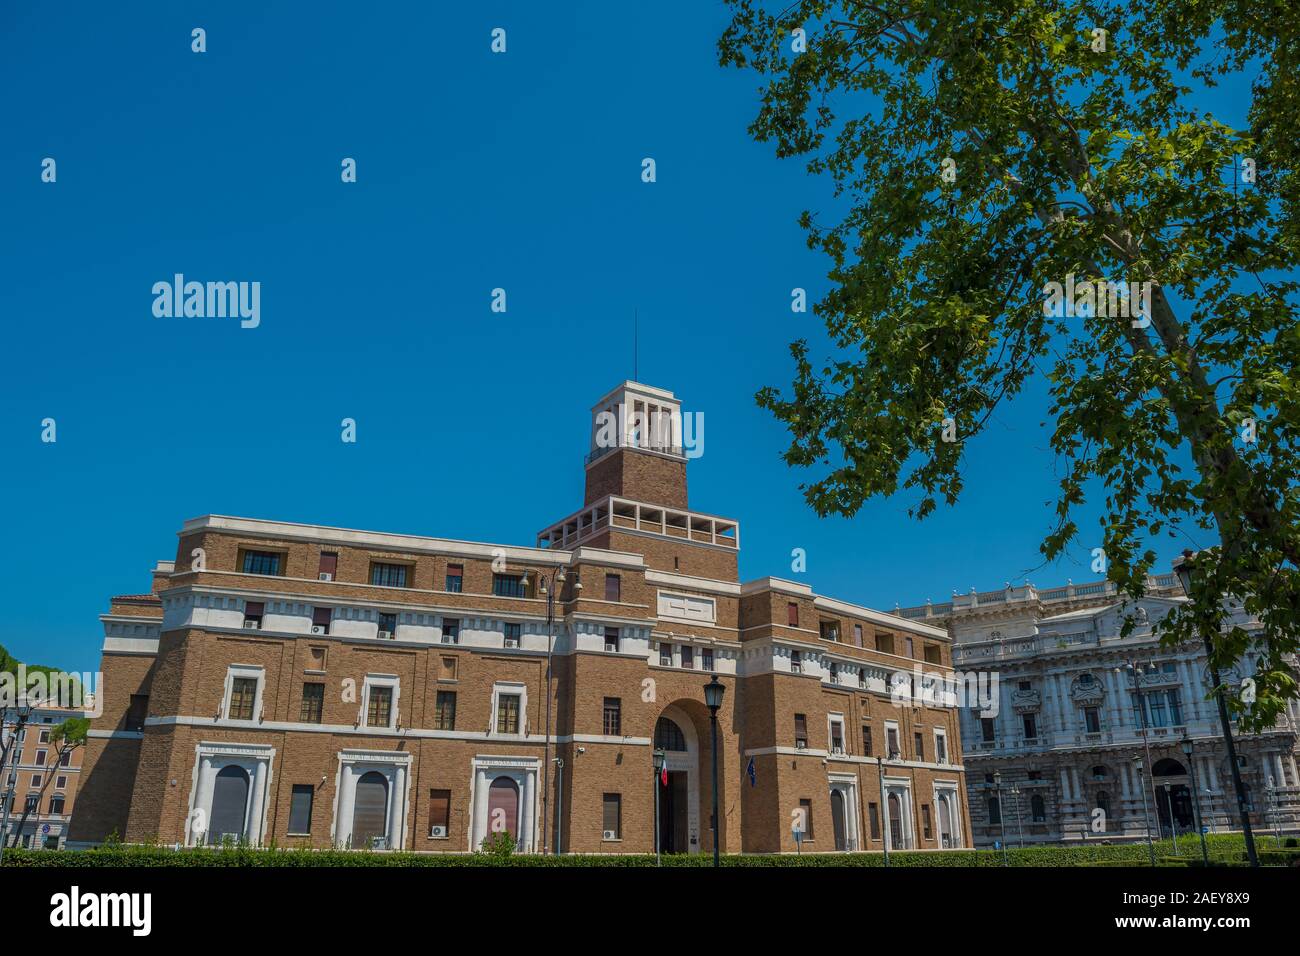 Beautiful tree-lined square in front of the court, great for buying souvenirs Stock Photo